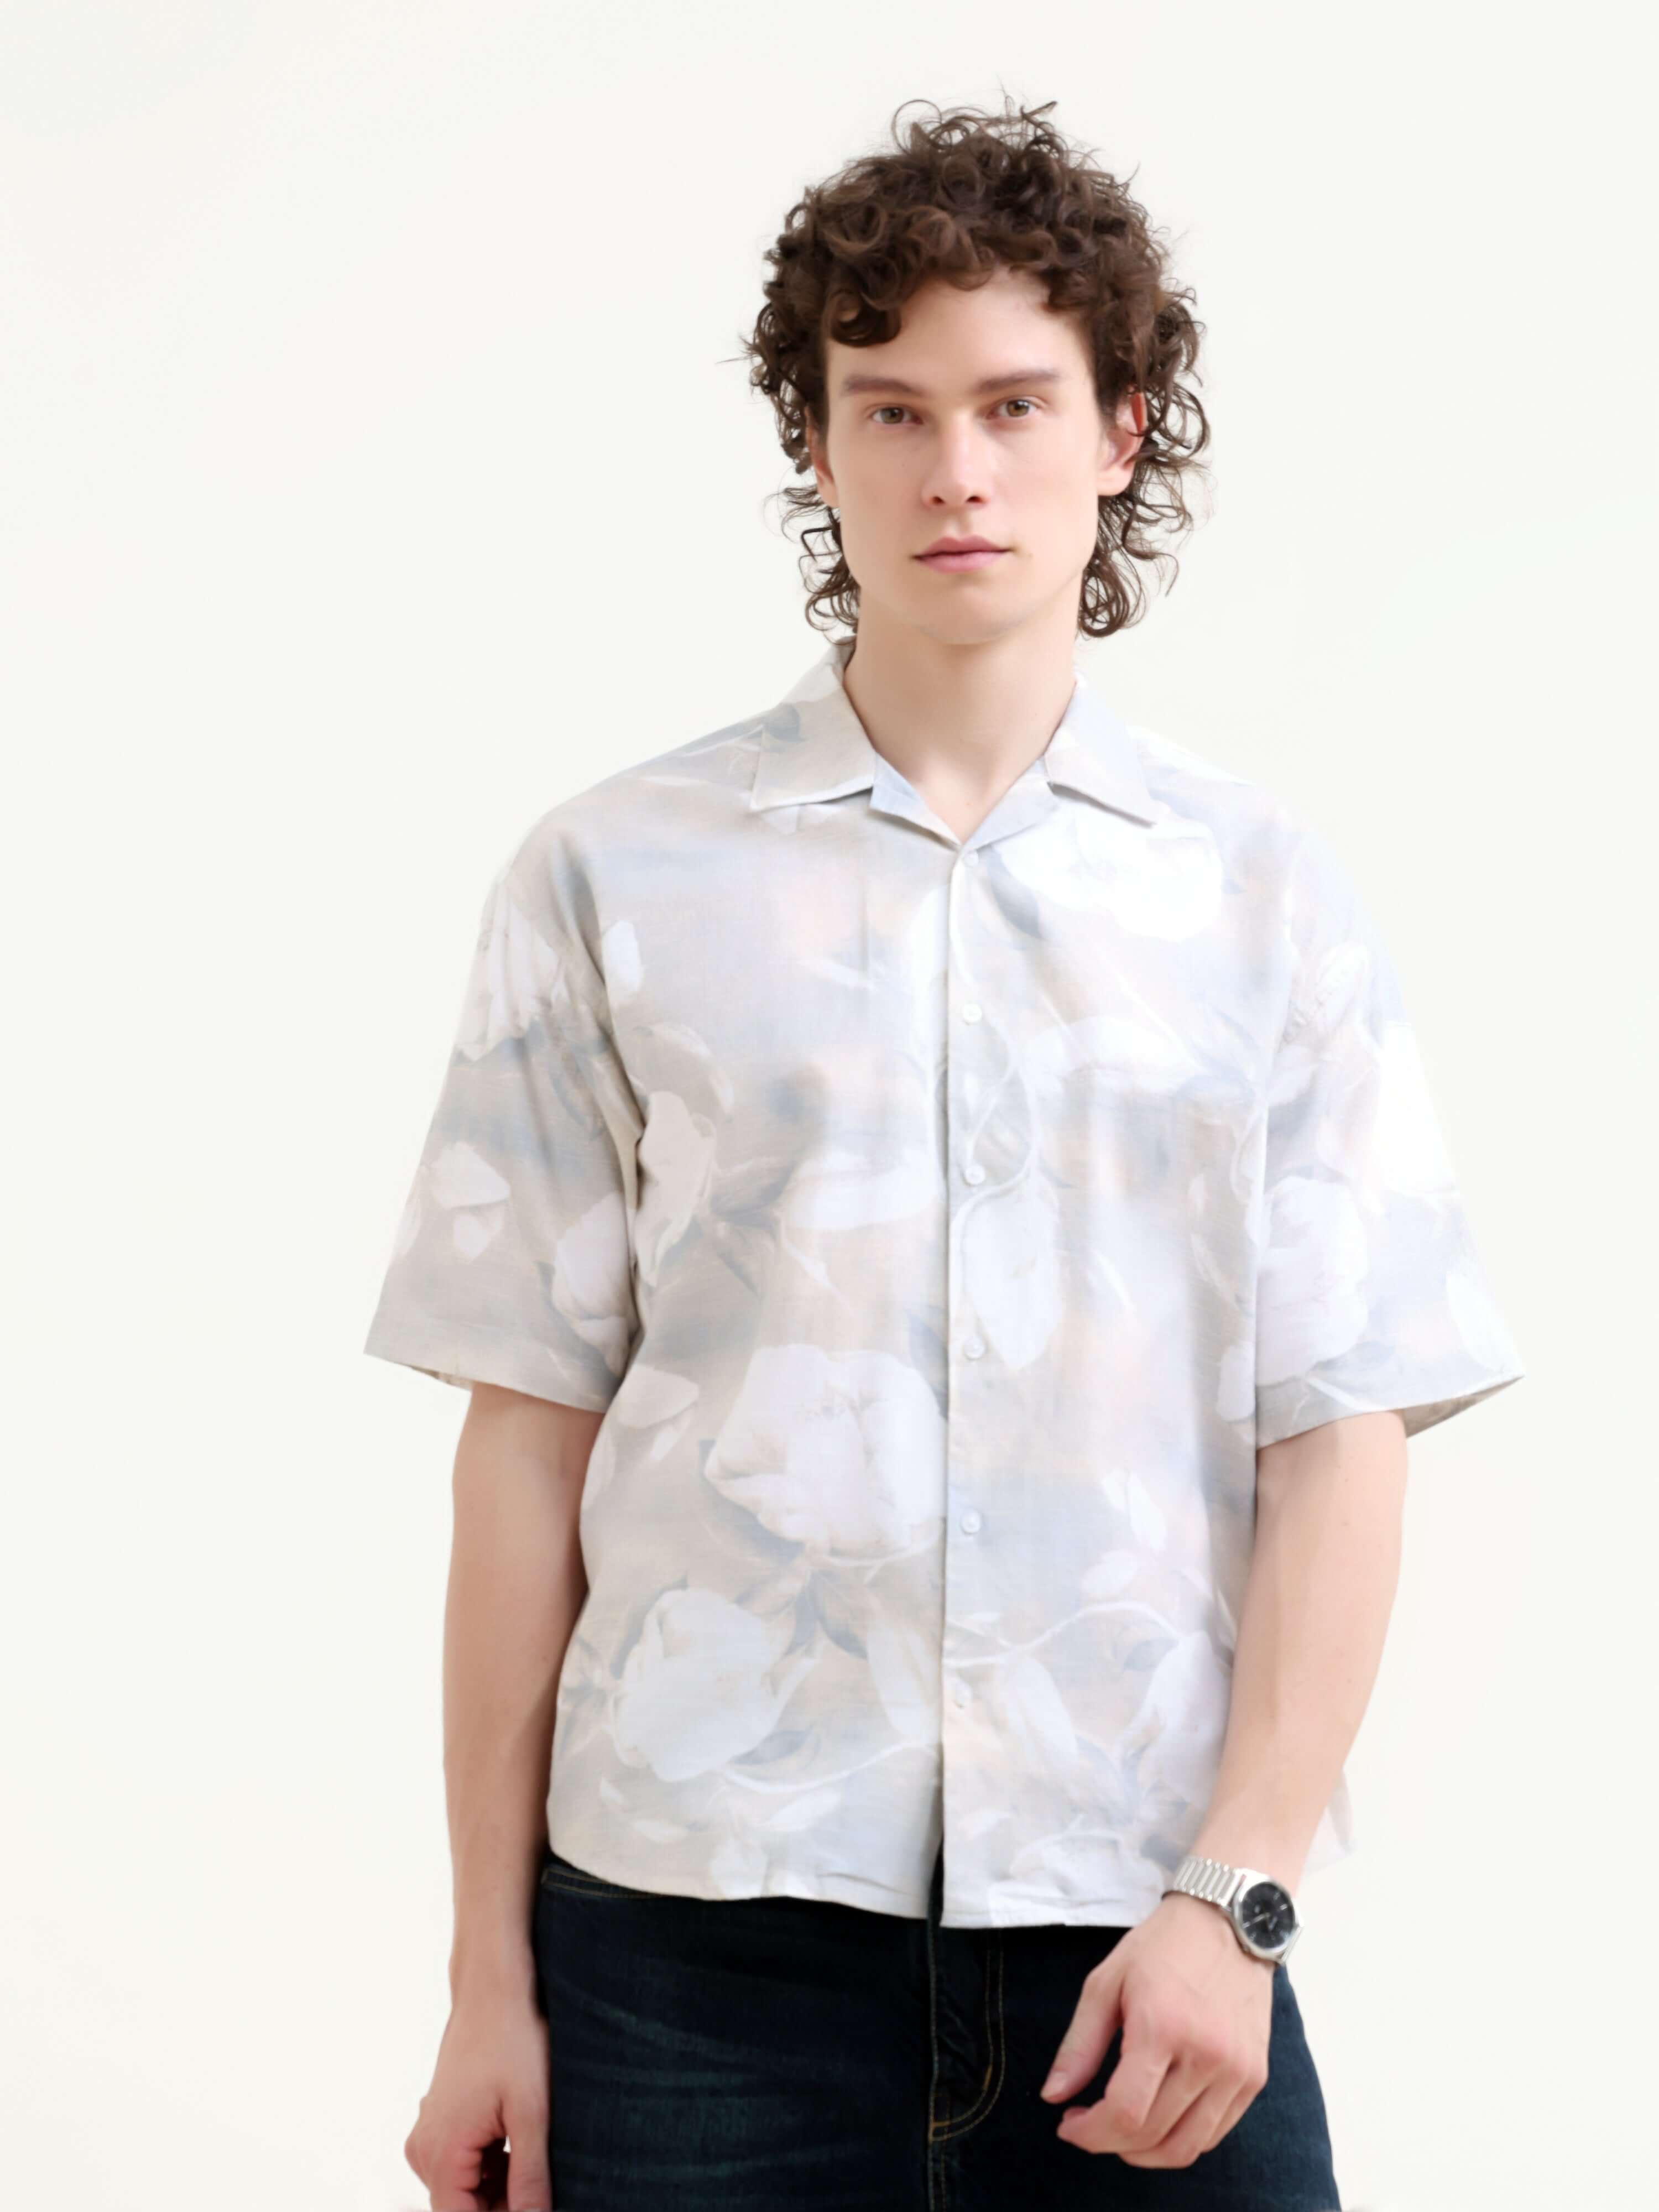 Men's Tropical Print Shirt - Summer Casual | Mirajo shop online at Estilocus. Embrace summer with Mirajo's oversized tropical shirt. Ideal for a relaxed, casual look - new arrival, ready for Hawaiian days & street style.